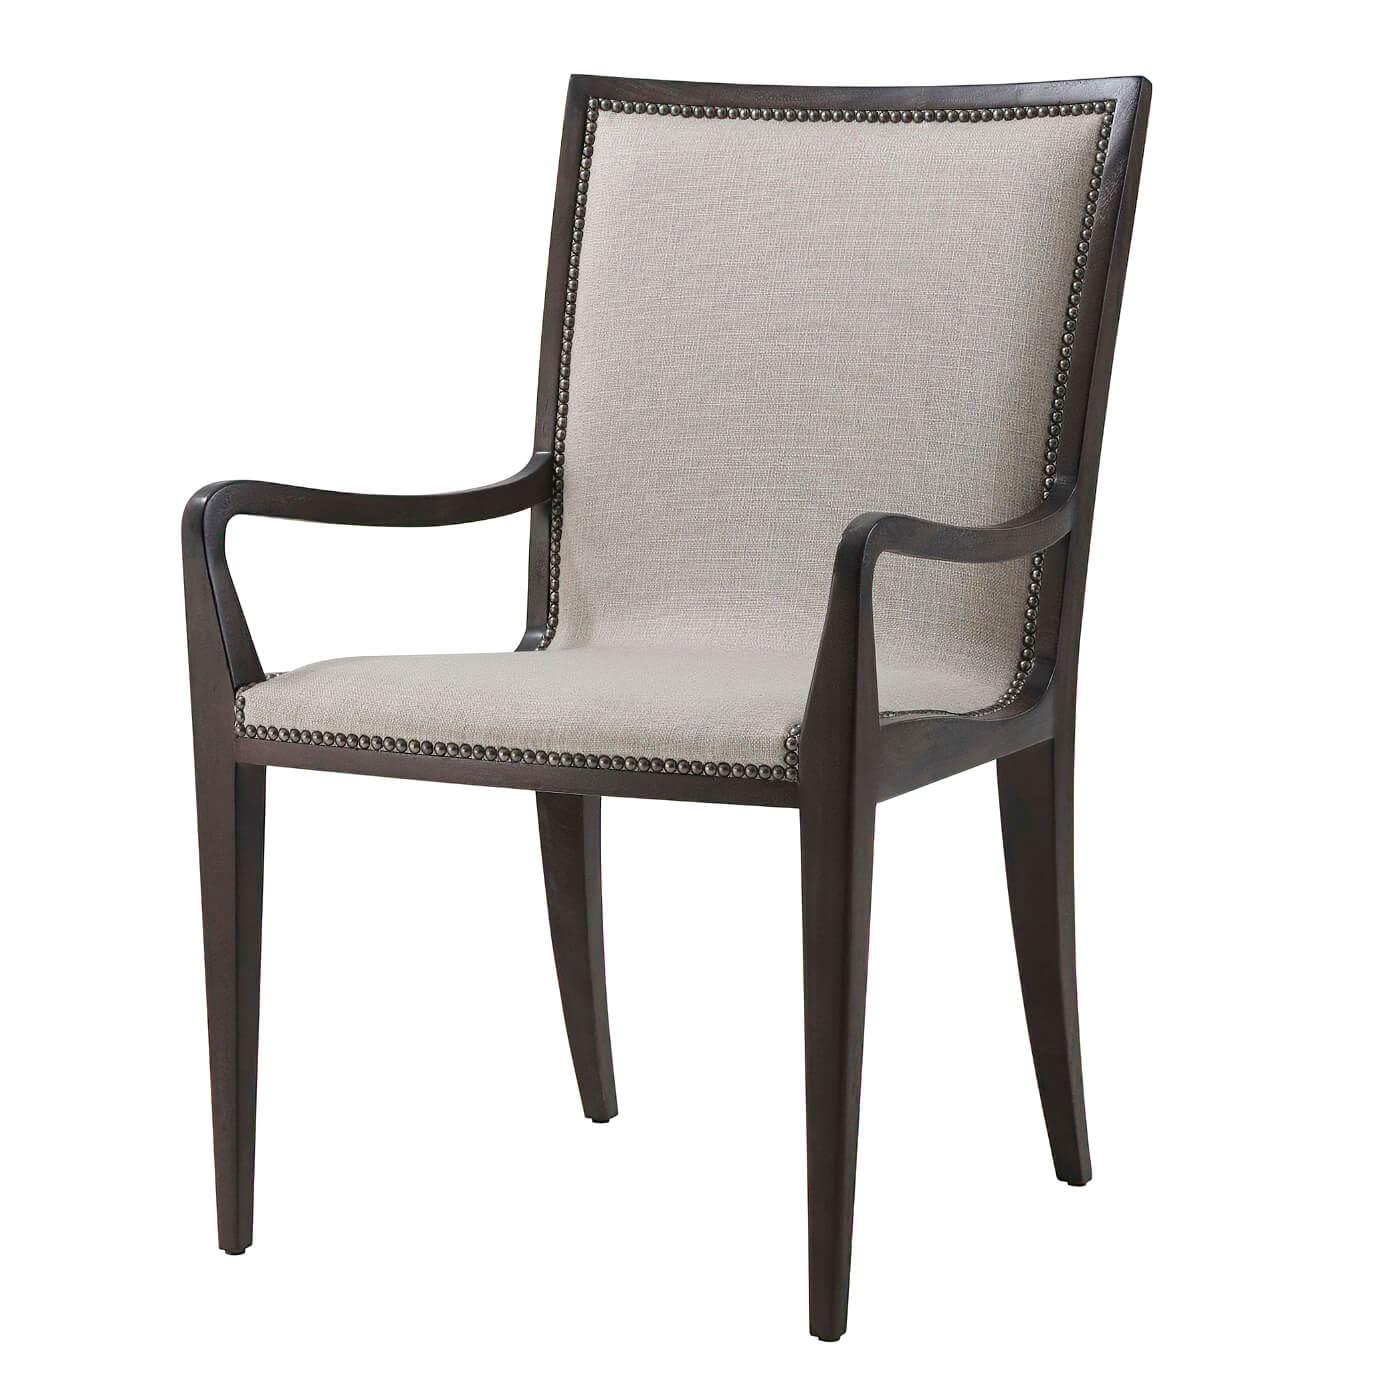 Mid Century modern style mahogany mesquite finish armchair with a slung upholstered seat and back.
Shown in Cream Hide-LE0306 Leather and Draper Performance-UP5409 Fabric
Trim: Antiqued Steel Nail
Each Hide has natural variations
Dimensions: